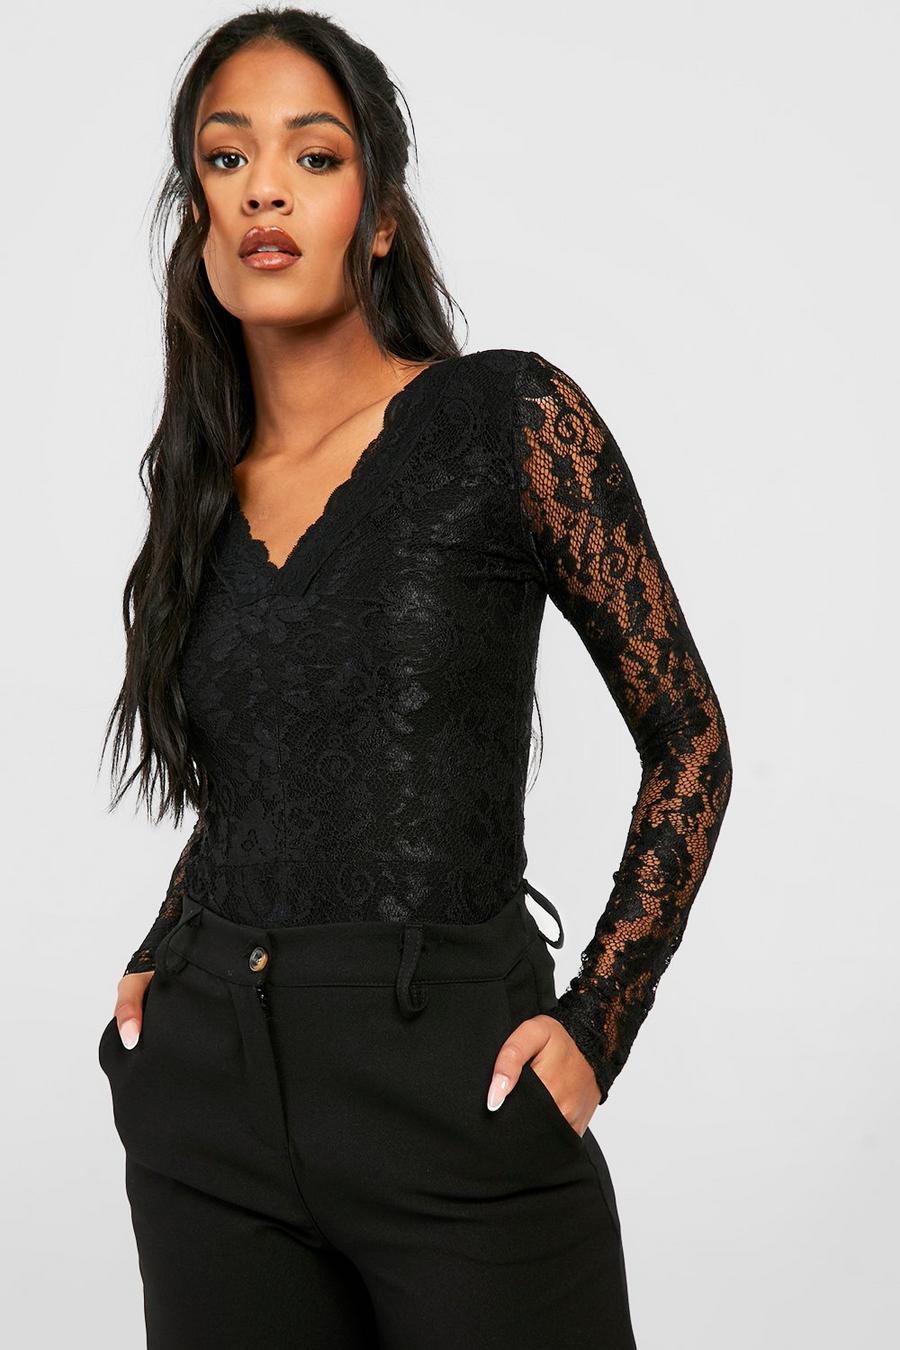 Lace, Lace Clothing & Outfits